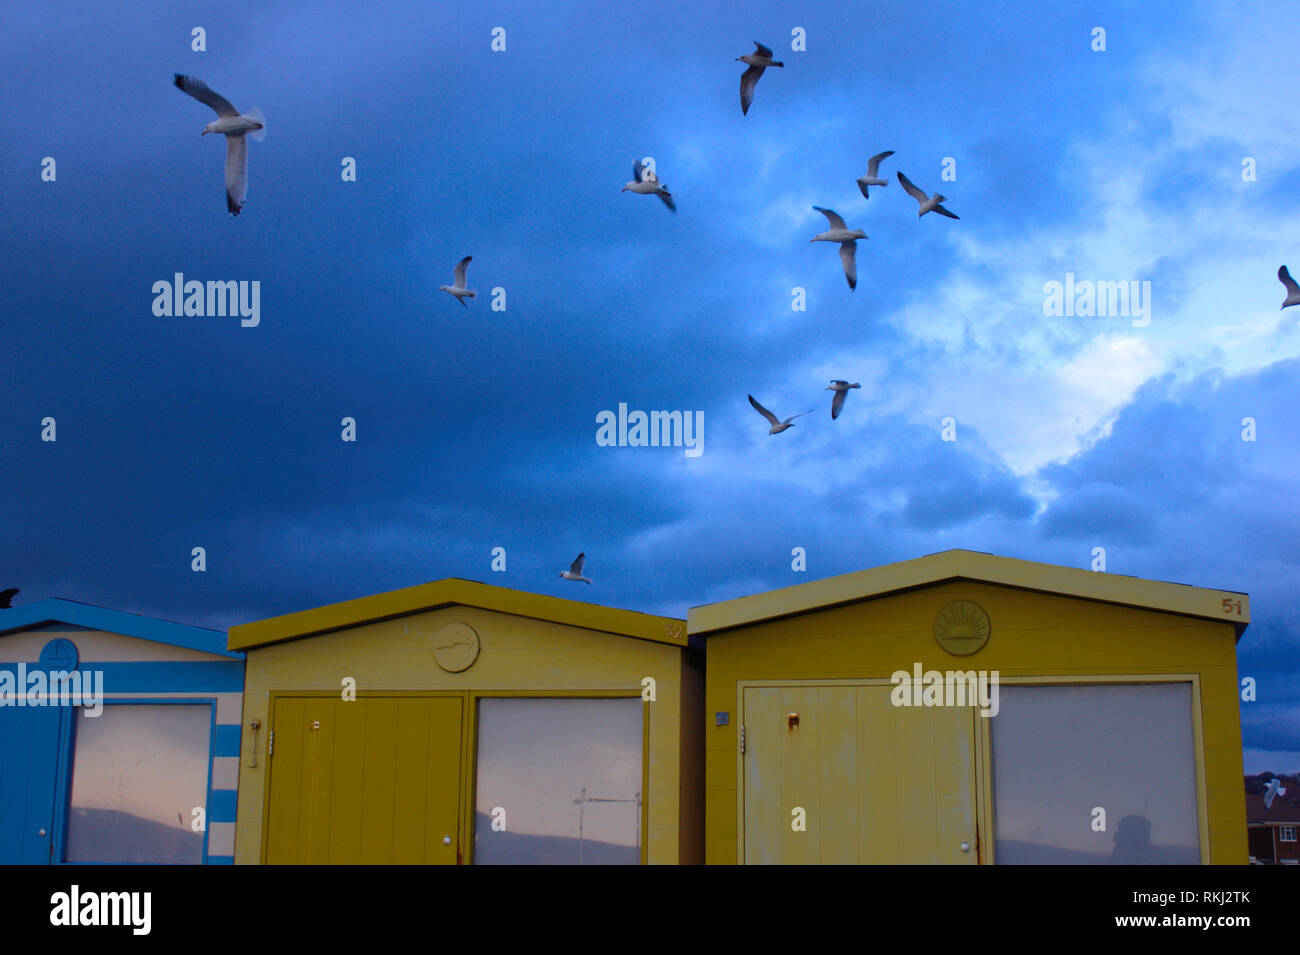 Famous colorful beach huts in Seaford with seagulls in the stormy sky. Stock Photo